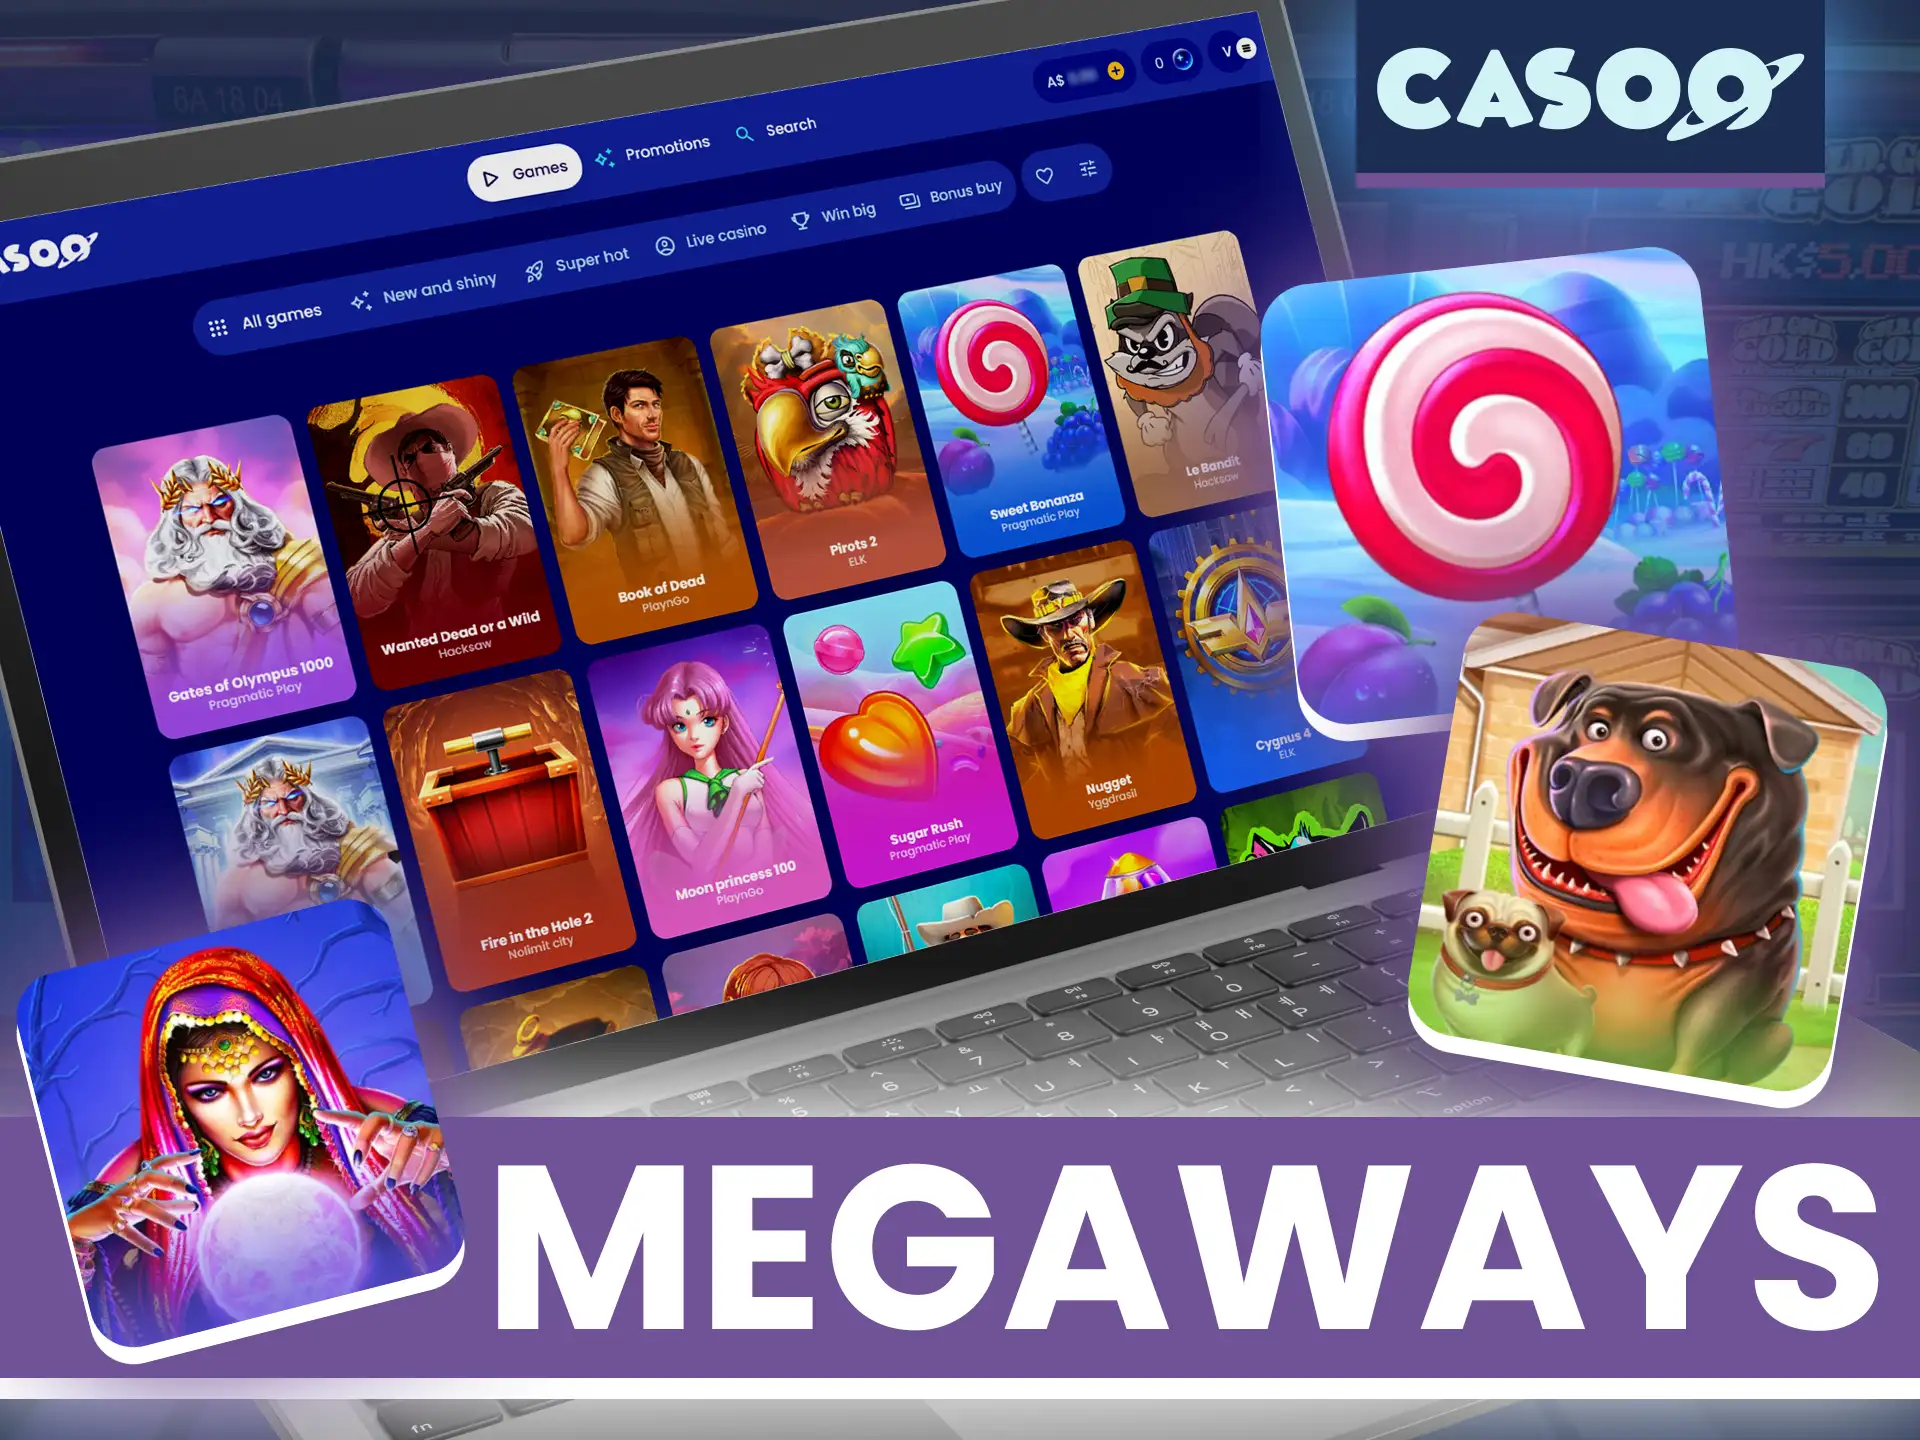 The popular Megaways slots are already available at Casoo Casino.